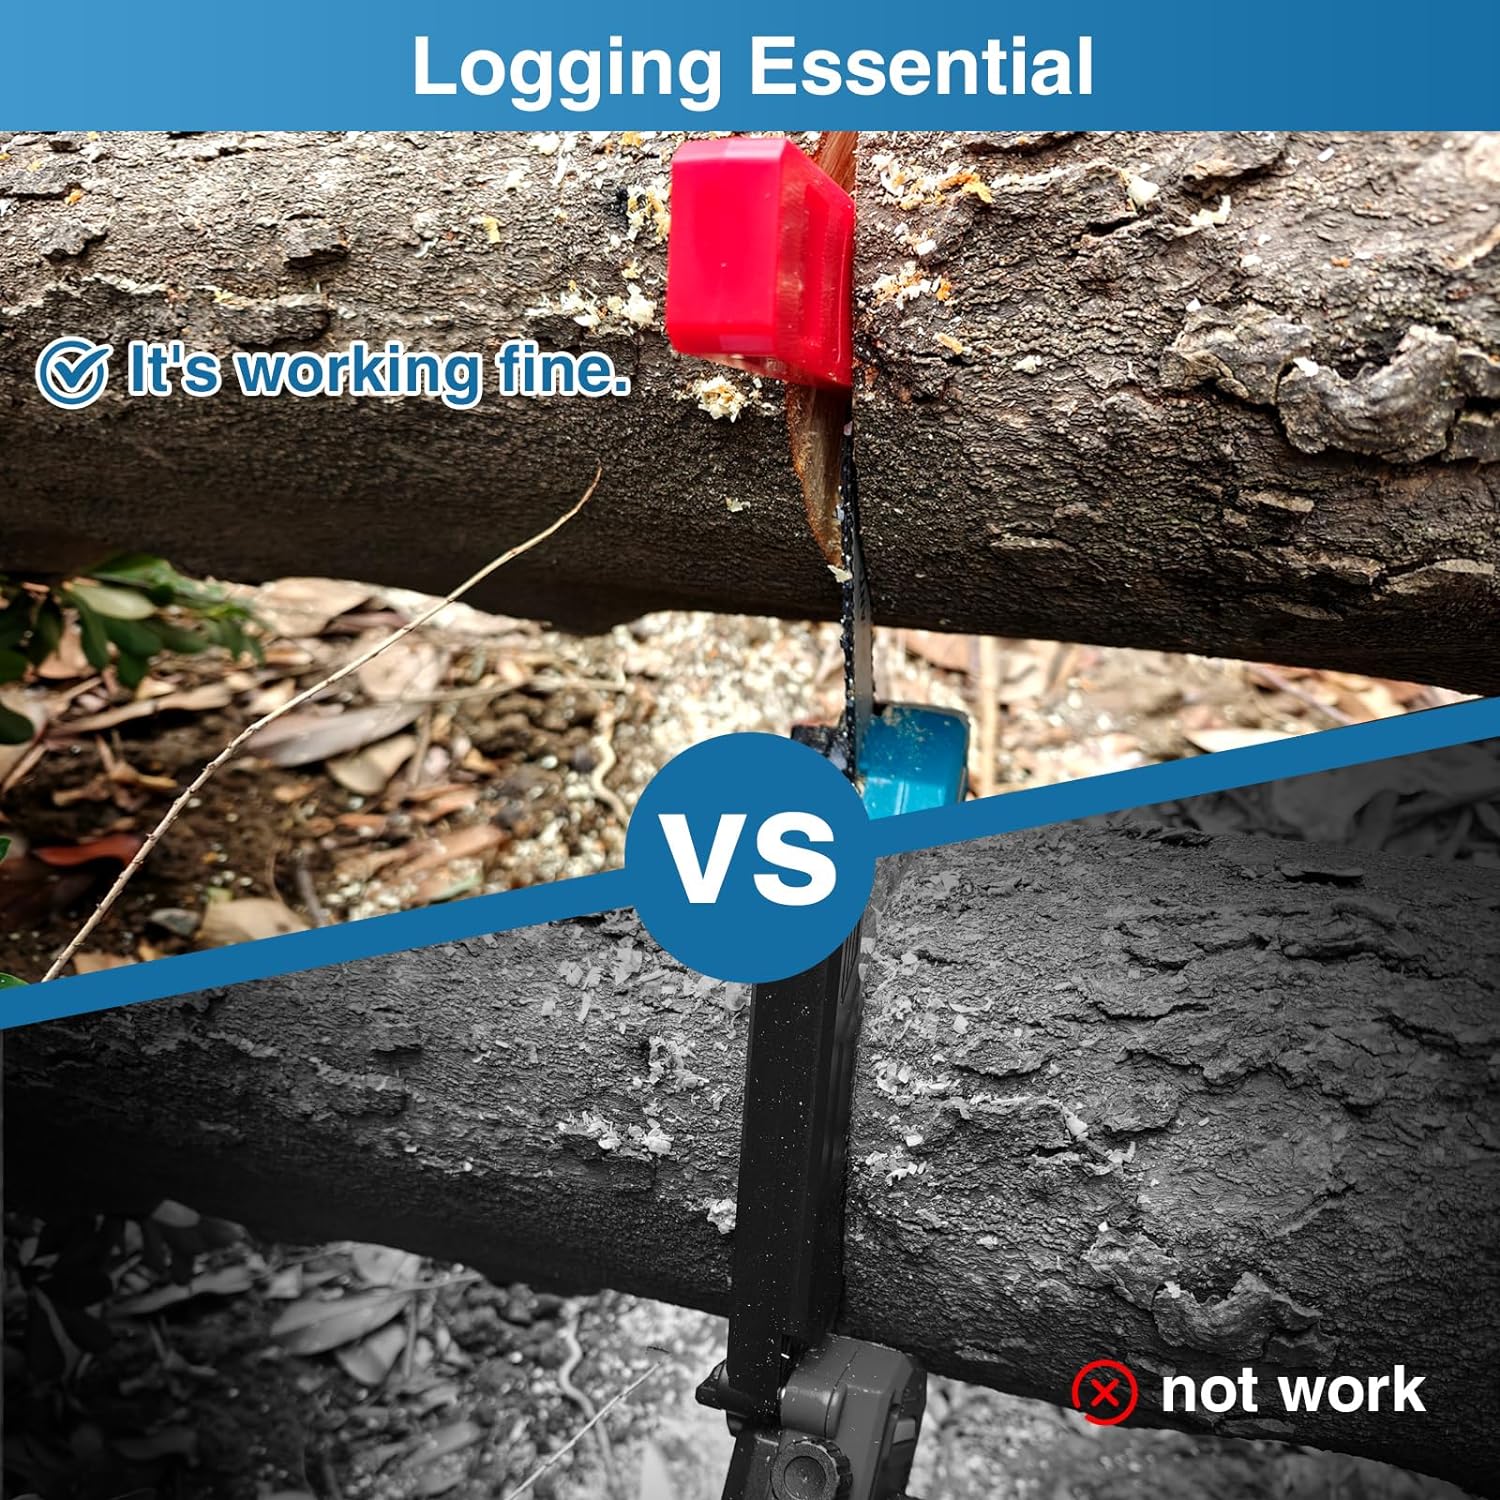 Logging Essential accessory lt's working perfectly